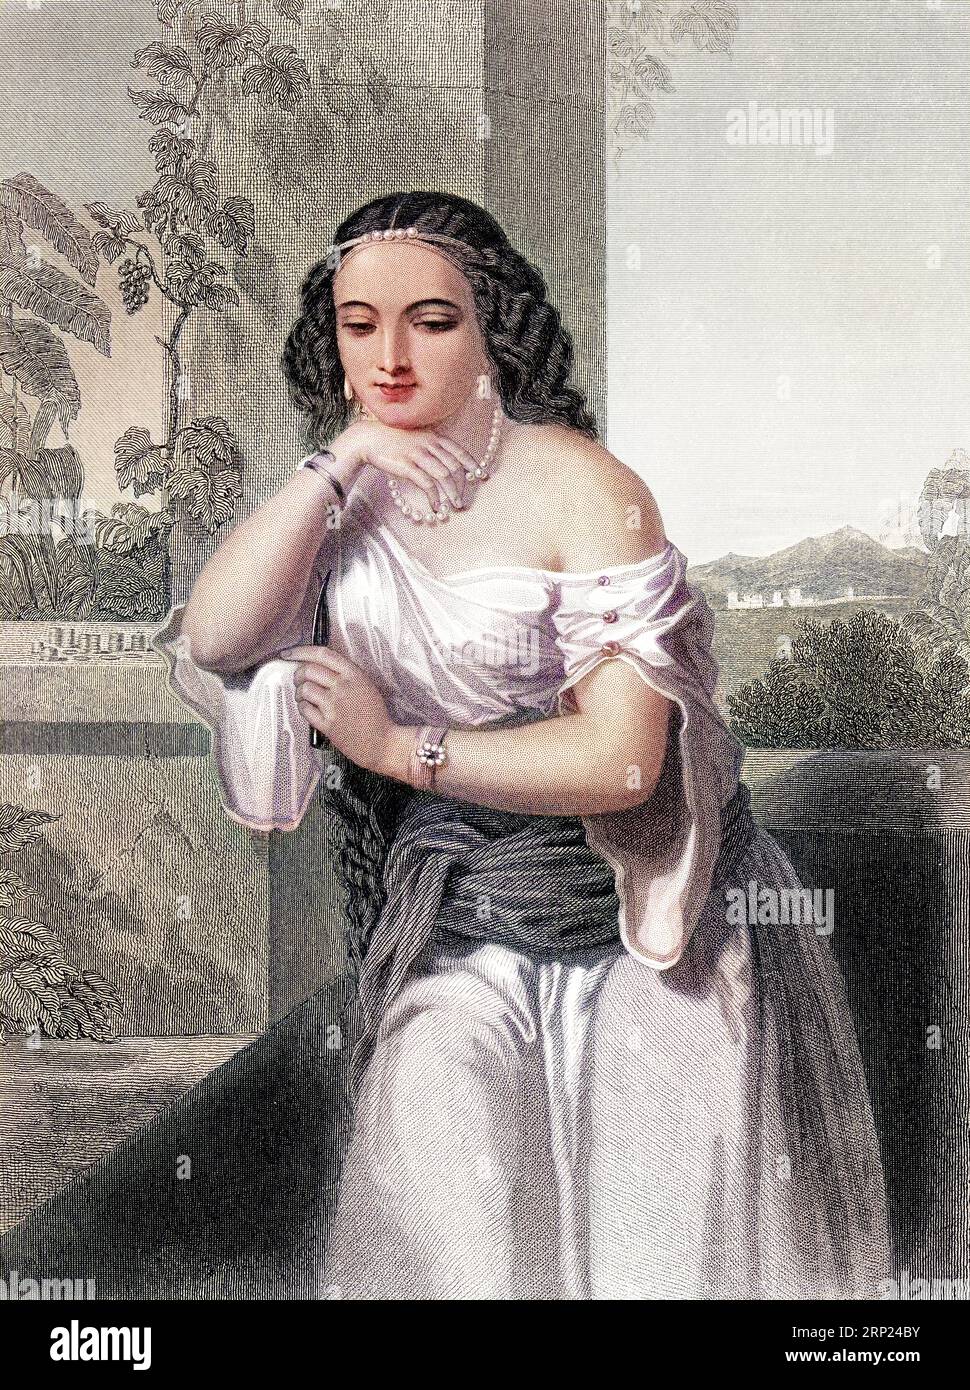 Delilah, Philistine of the Valley of Sorec, Samson's mistress, judge of Israel. She bribed by the Philistines, she sold Samson, cut off her hair while she slept and they were able to capture him. Old 19th century engraved colored illustration from Mugeres de la Biblia by Joaquin Roca y Cornet 1862 Stock Photo